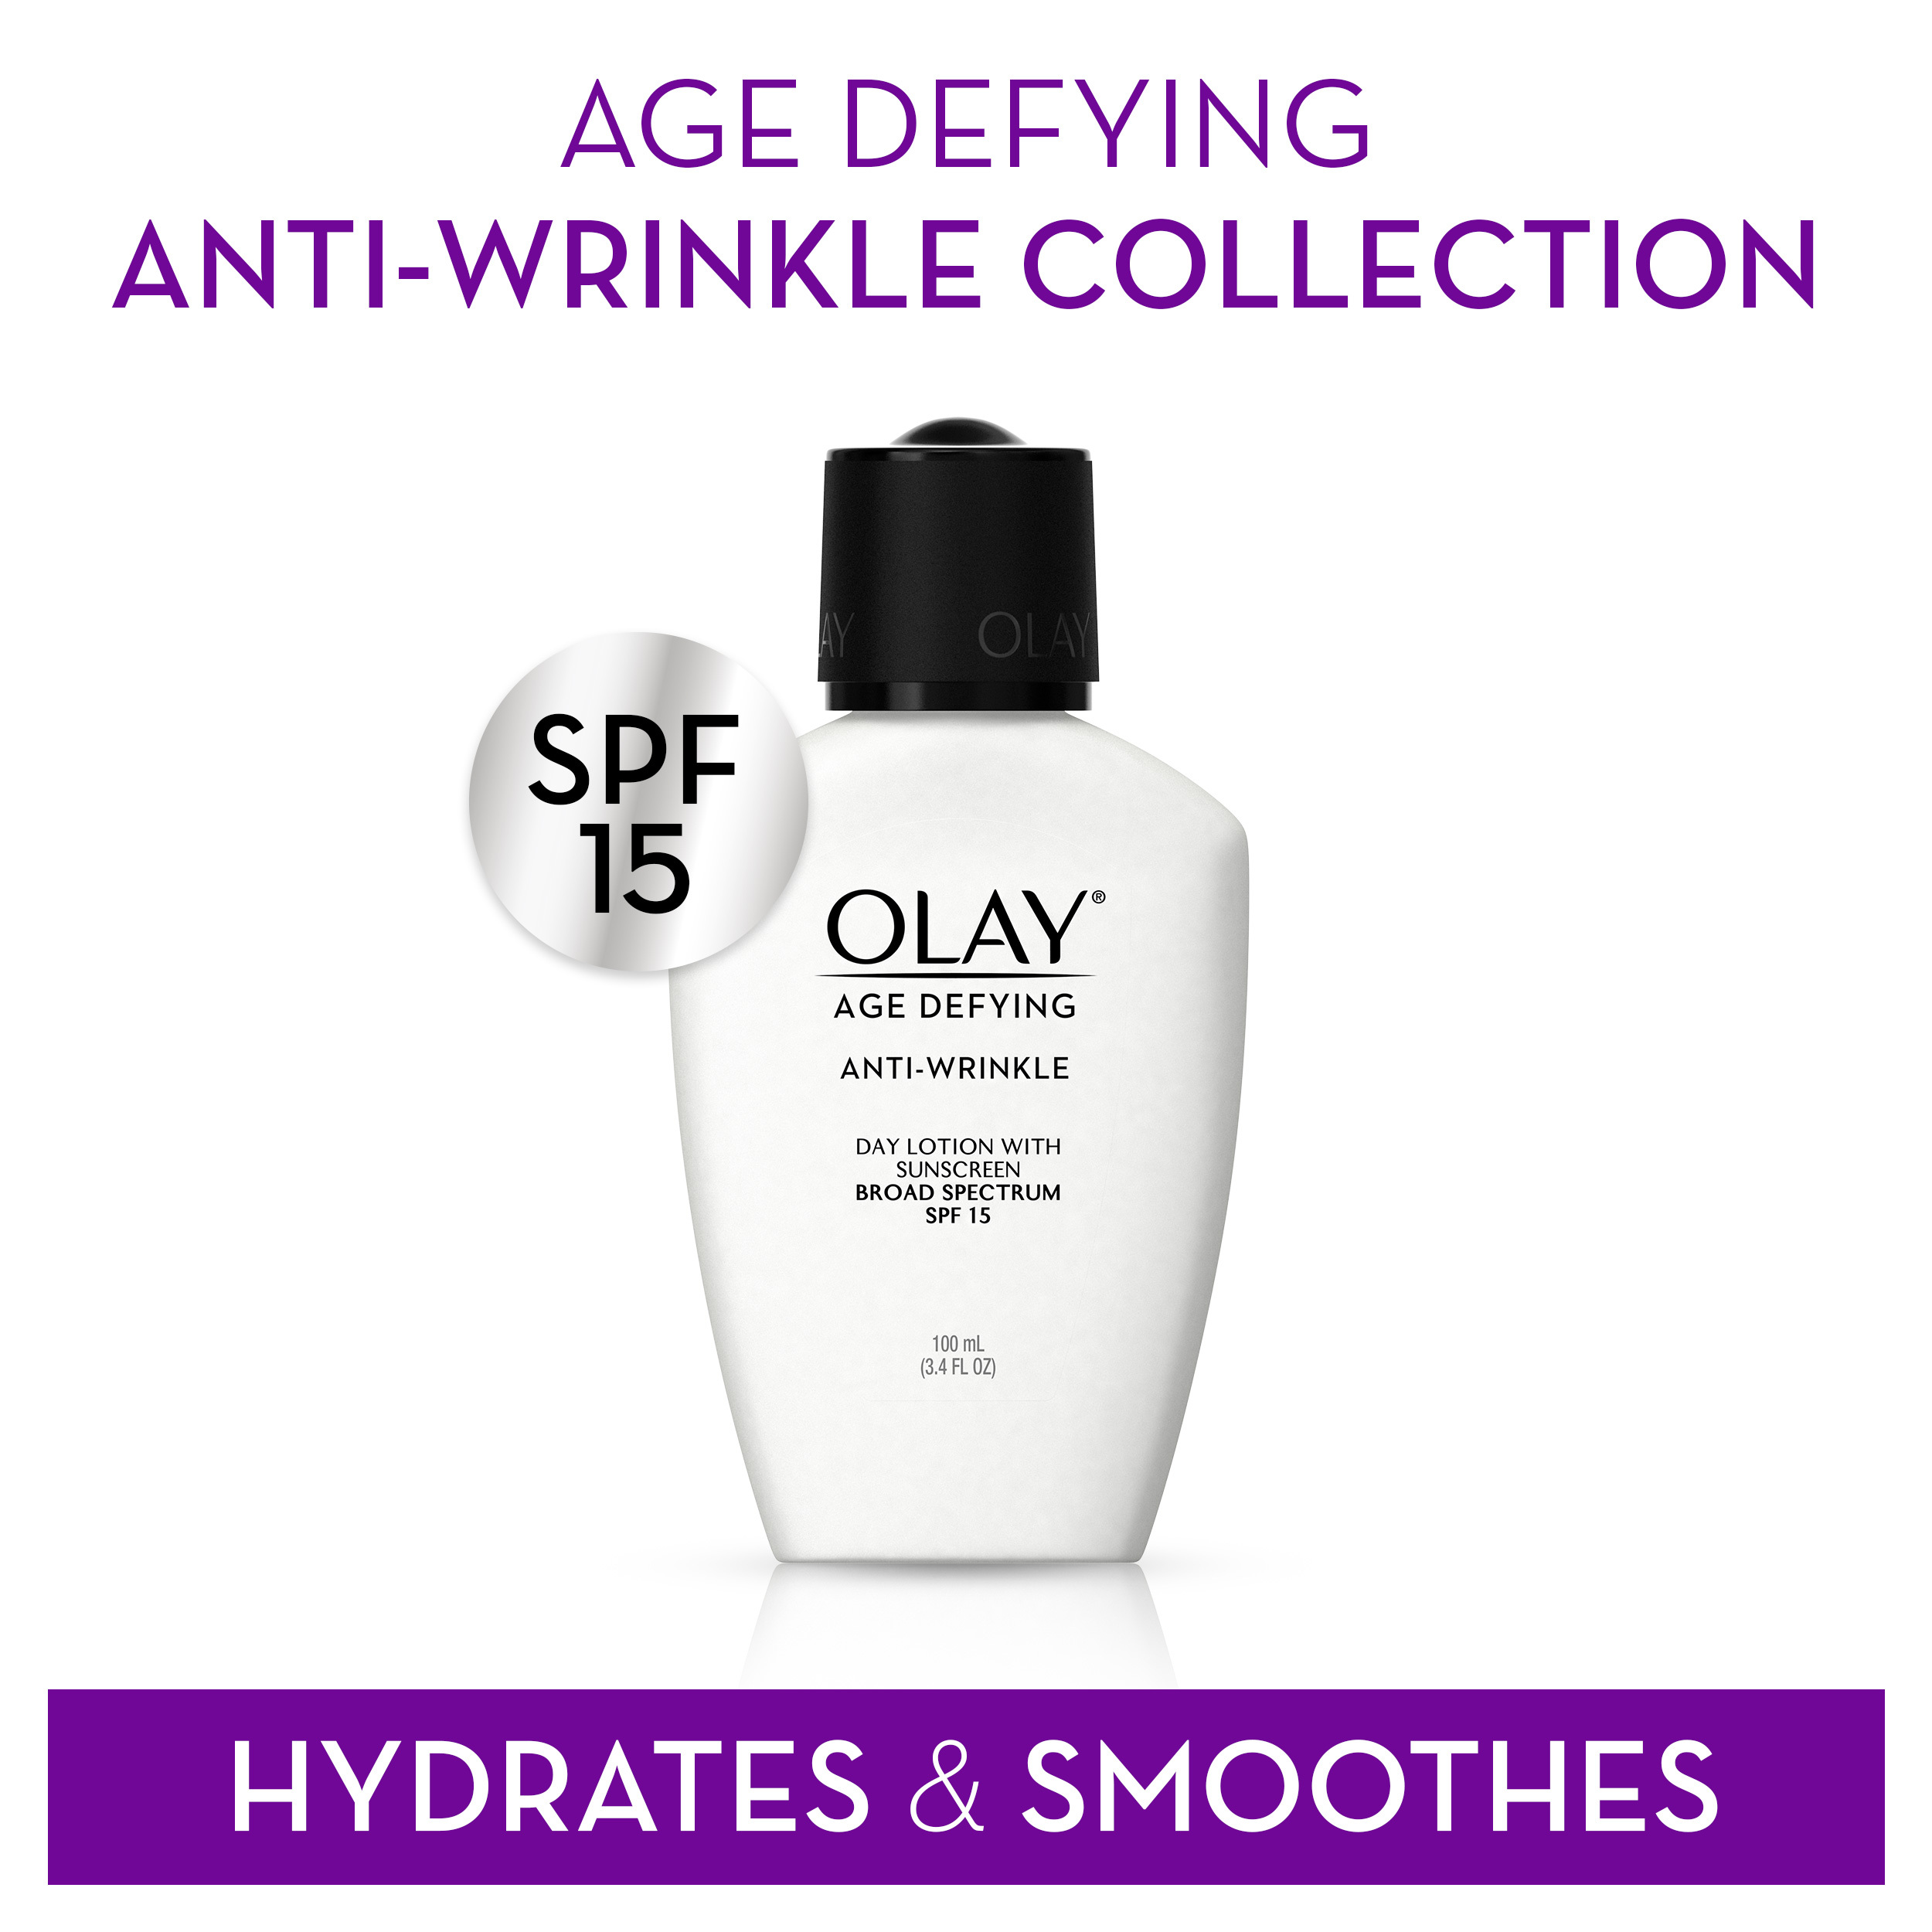 Olay Age Defying Anti-Wrinkle Day Face Lotion with Sunscreen SPF 15, For All Skin Types, 3.4 fl oz - image 5 of 8